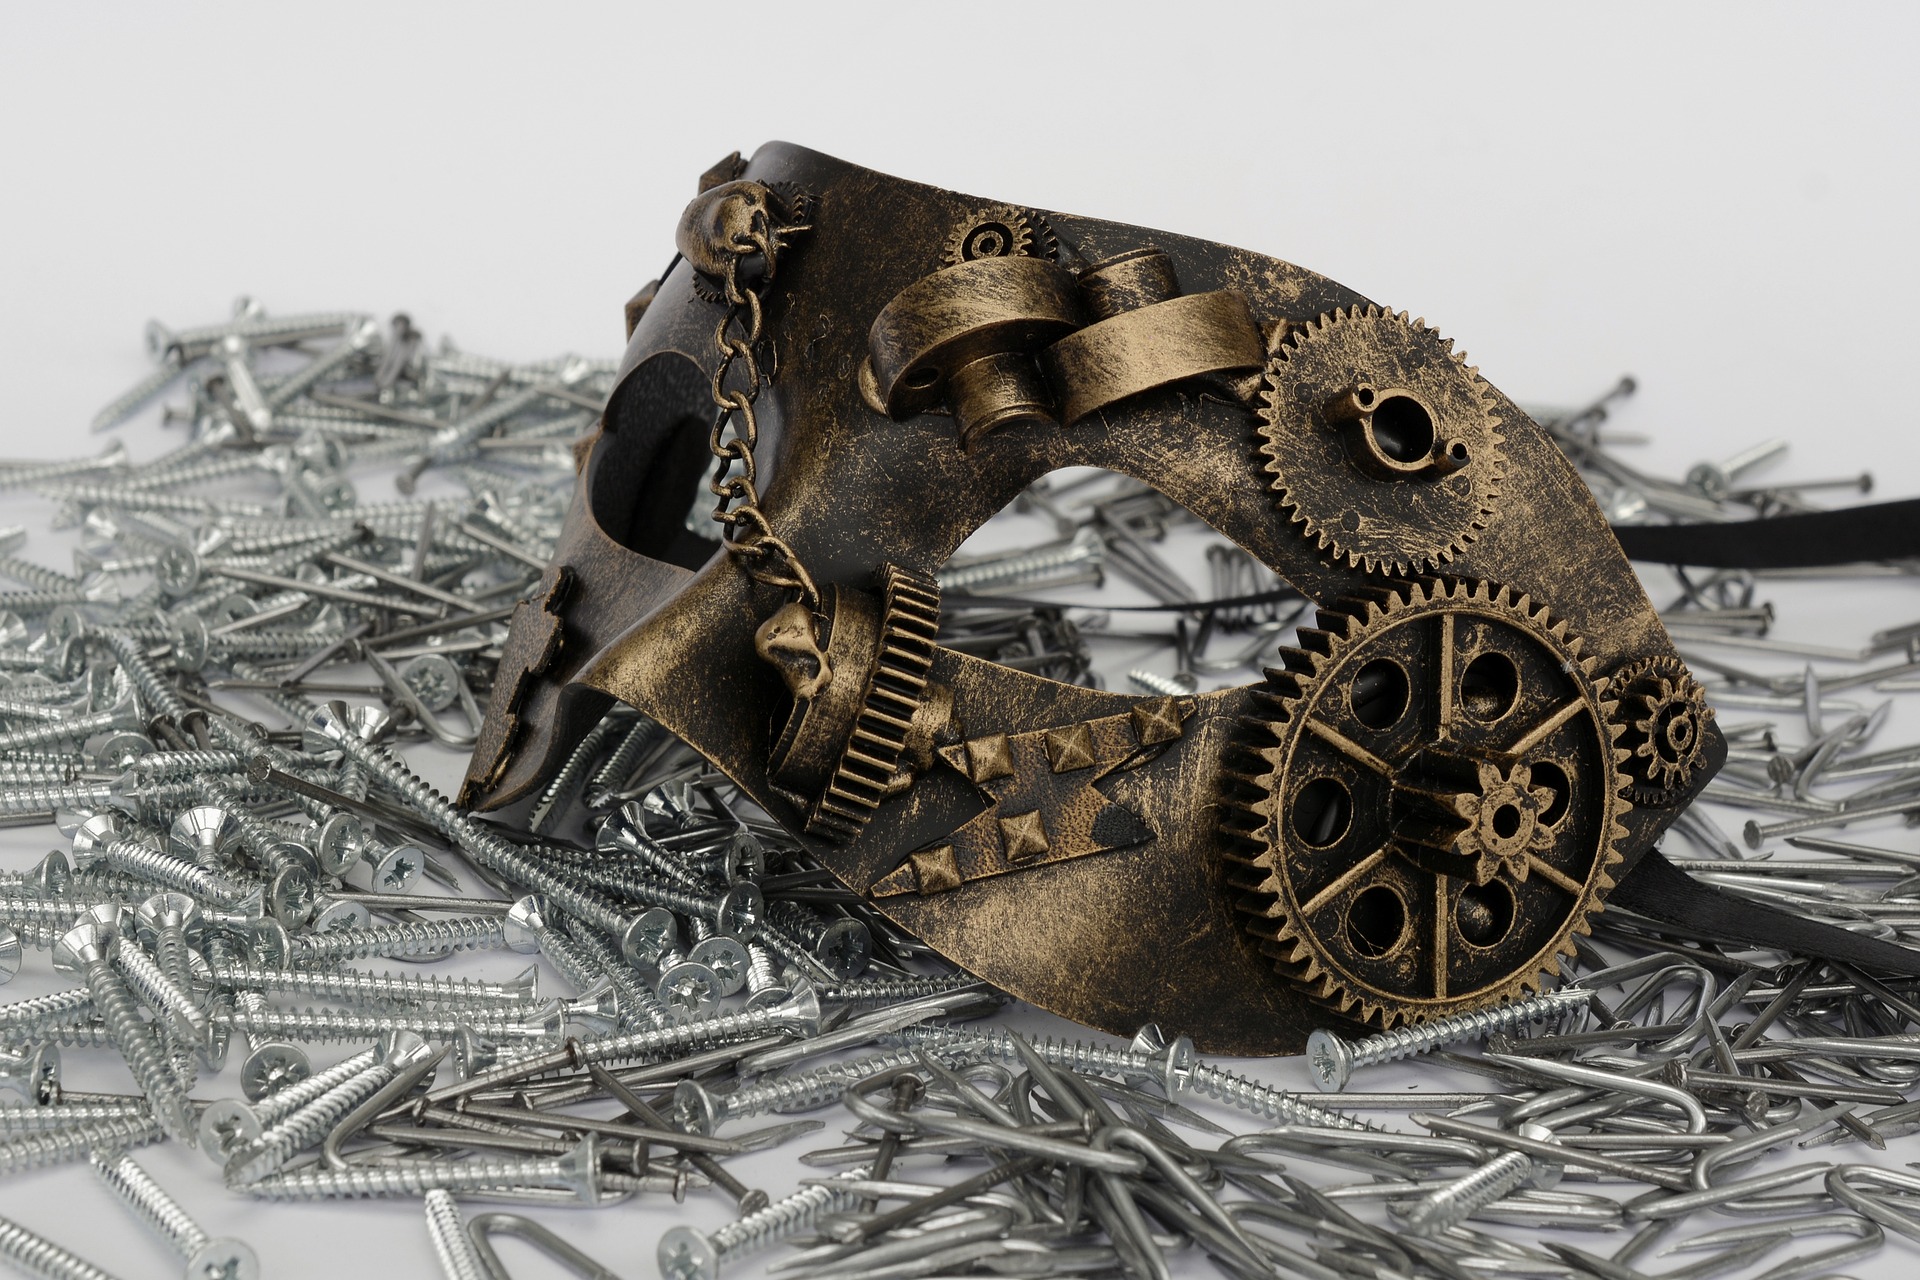 A masquerade mask with cogs and wheels placed on a jumble of screws.